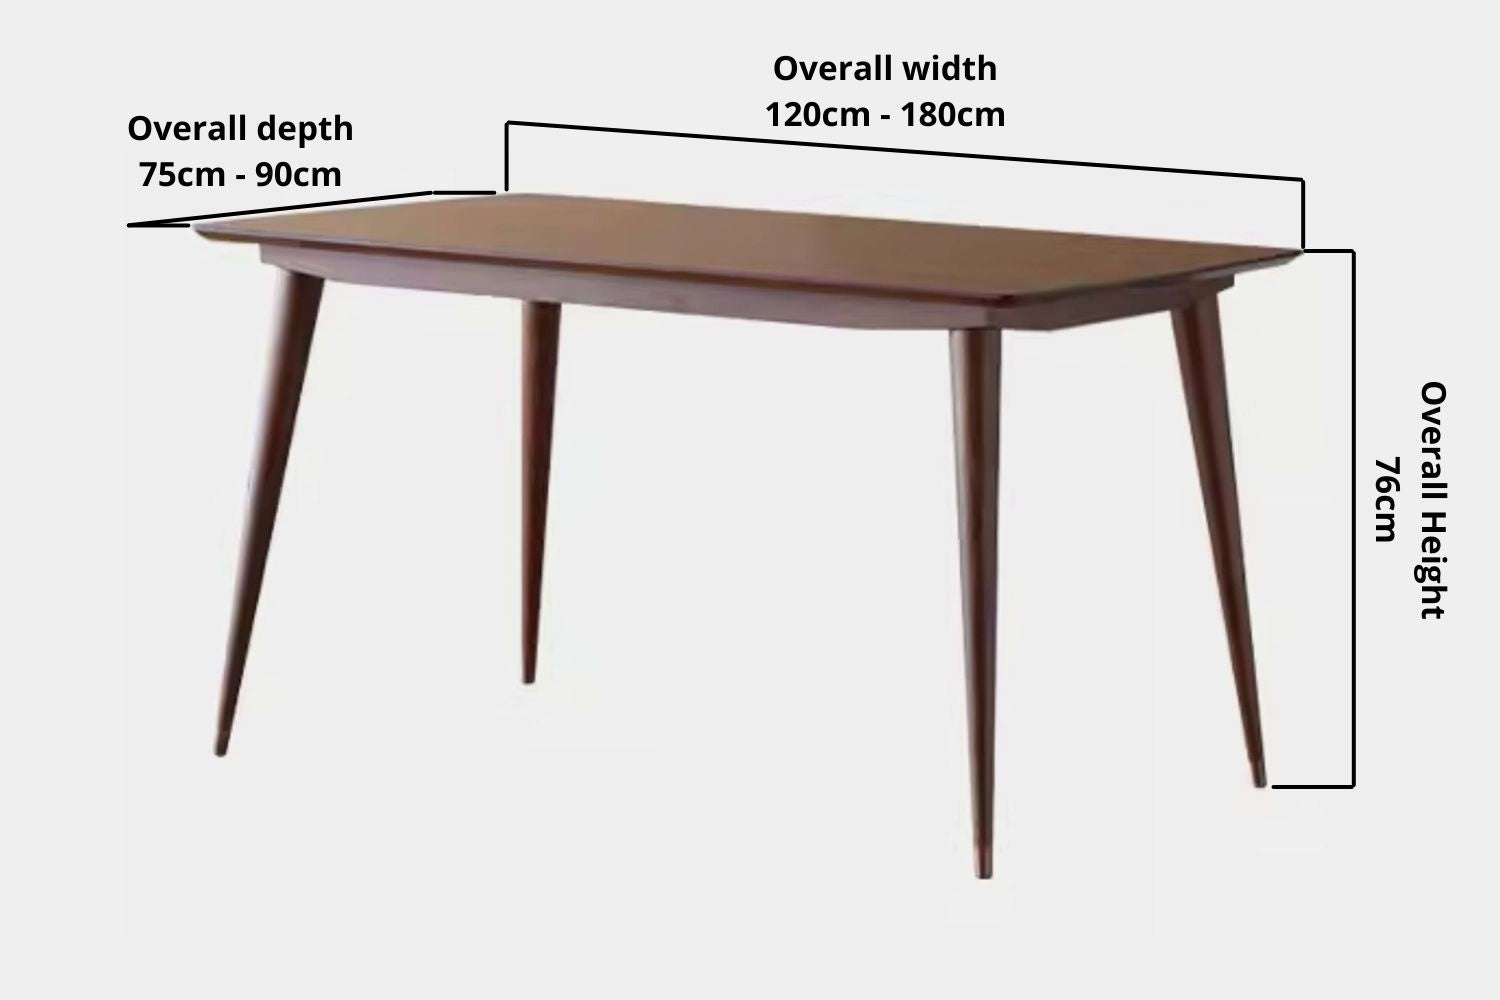 Key product dimensions such as depth, width and height for Tate Poplar Wood Dining Table Set